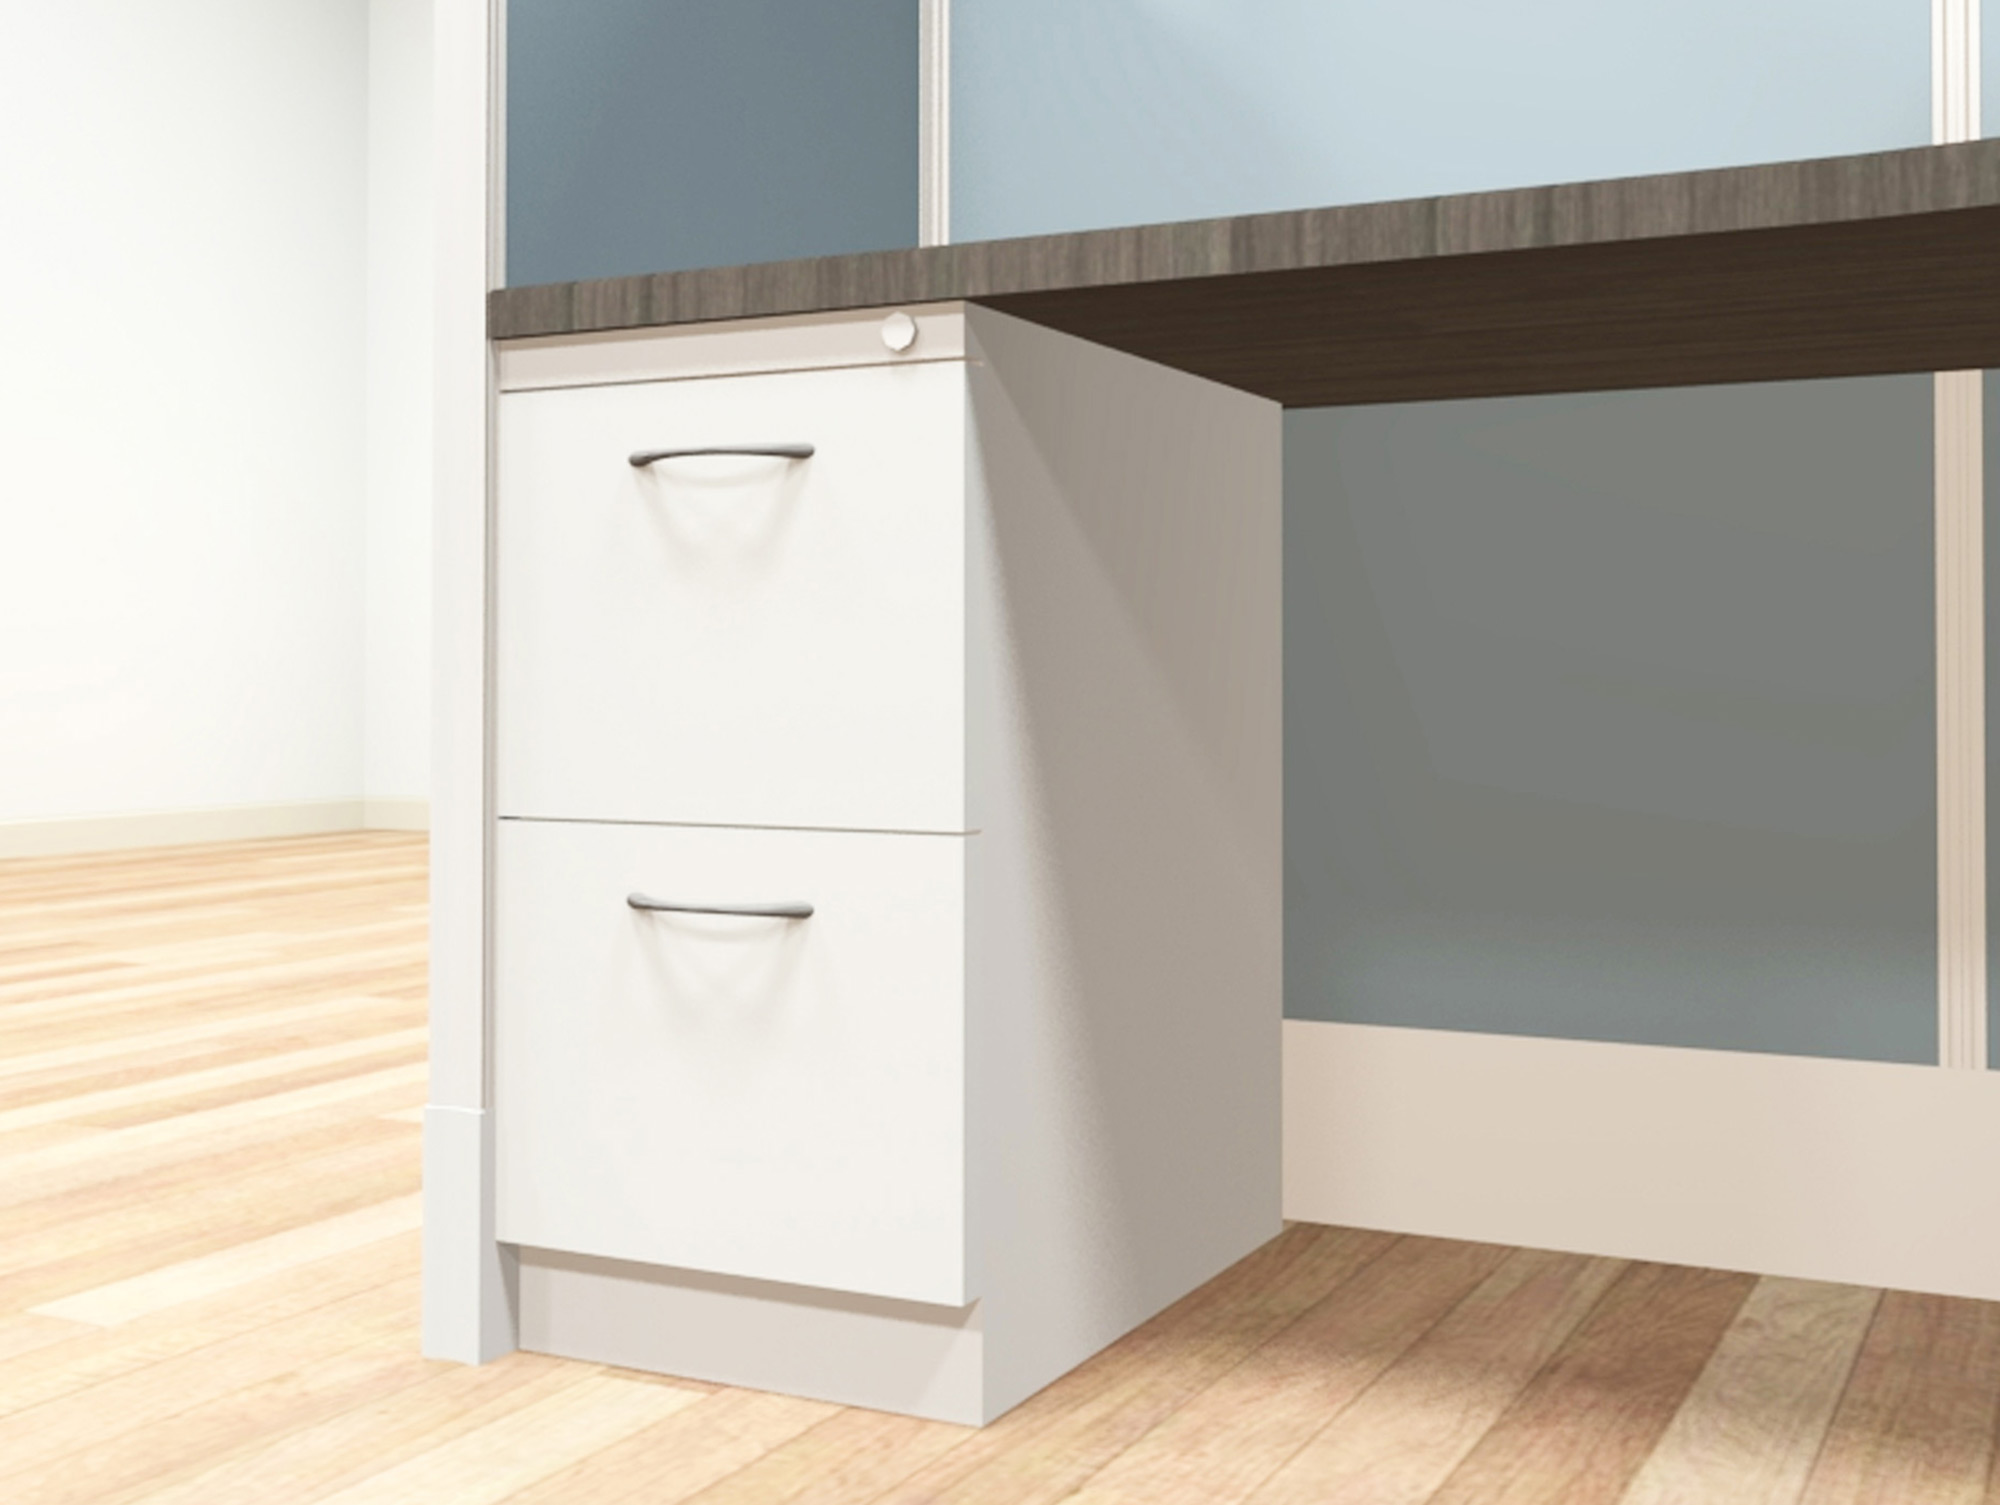 6x8 modular workstations from AIS - a ï¿½file-fileï¿½ pedestal is an under-surface storage cabinet with two deep drawers designed for hanging files. Lock and key secures all drawers from unwanted visitors.